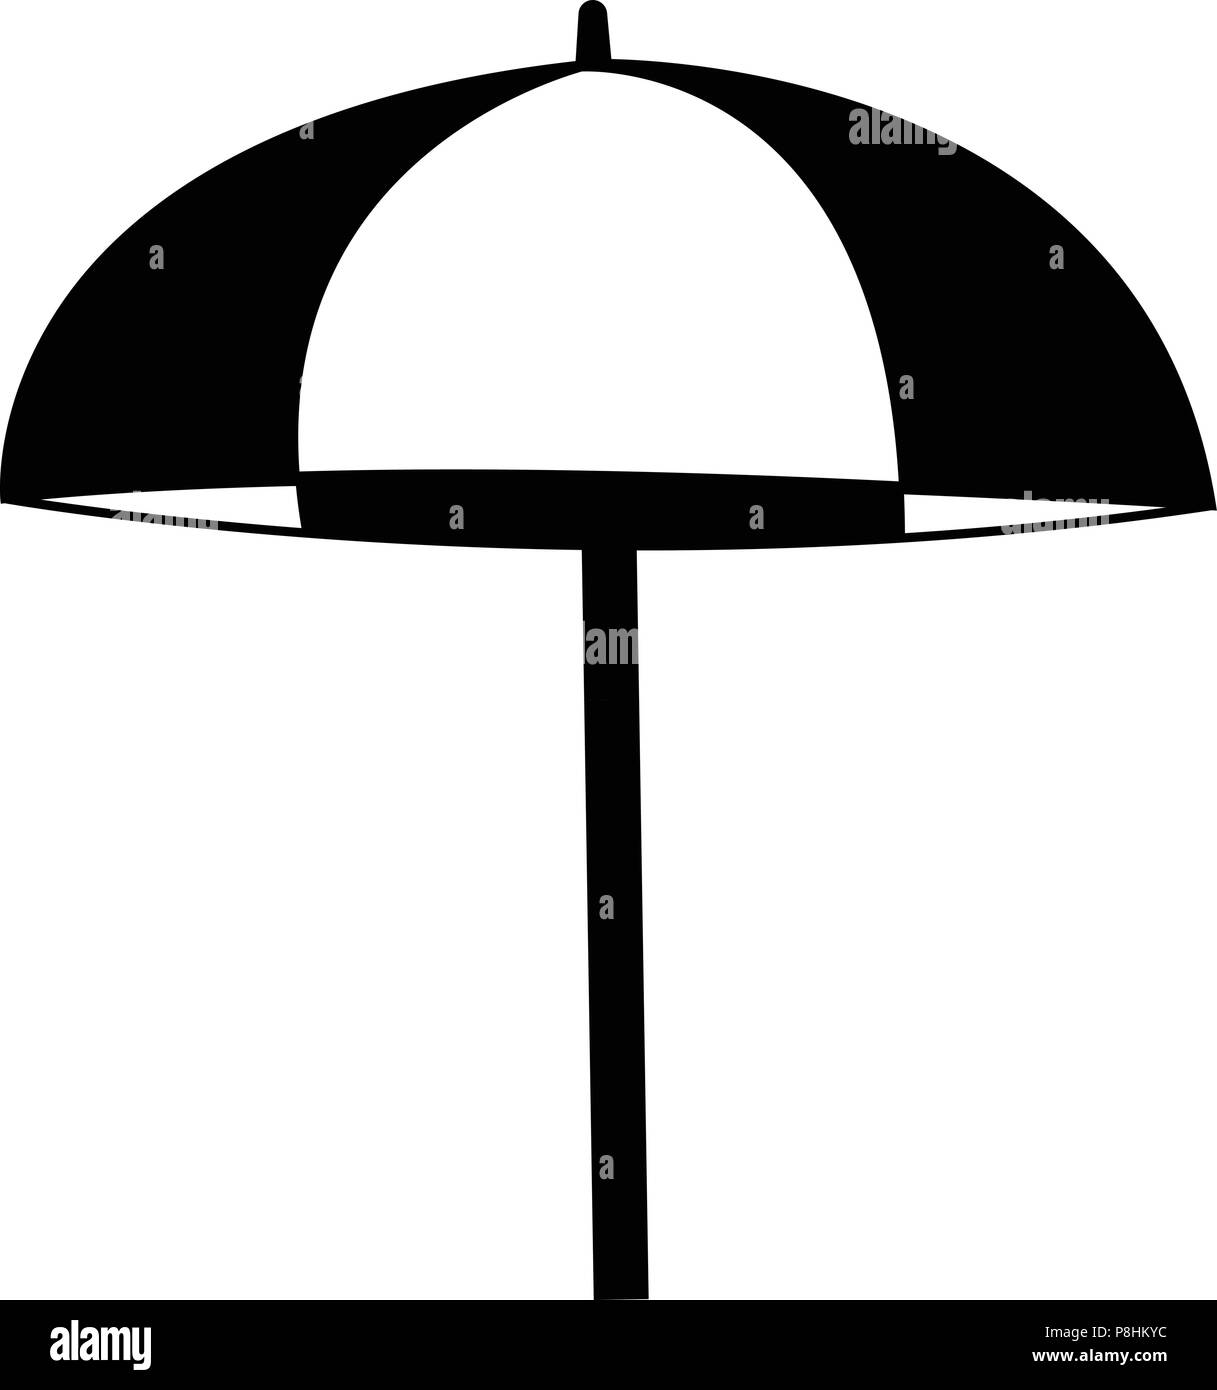 Vector black and white silhouette illustration of beach striped umbrella side view icon isolated on white background. Stock Vector